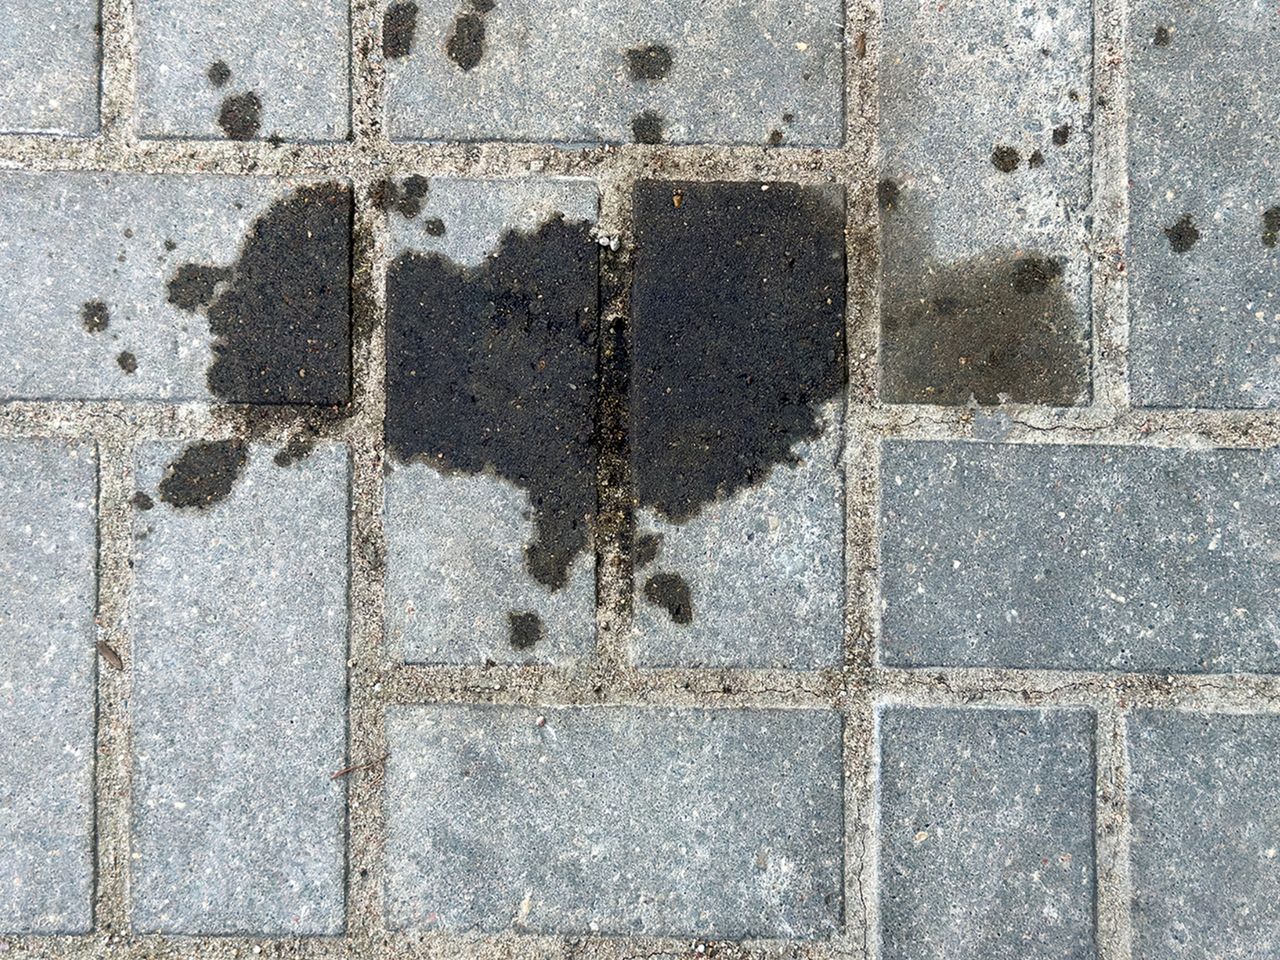 How to clean paving stones from oil stains?